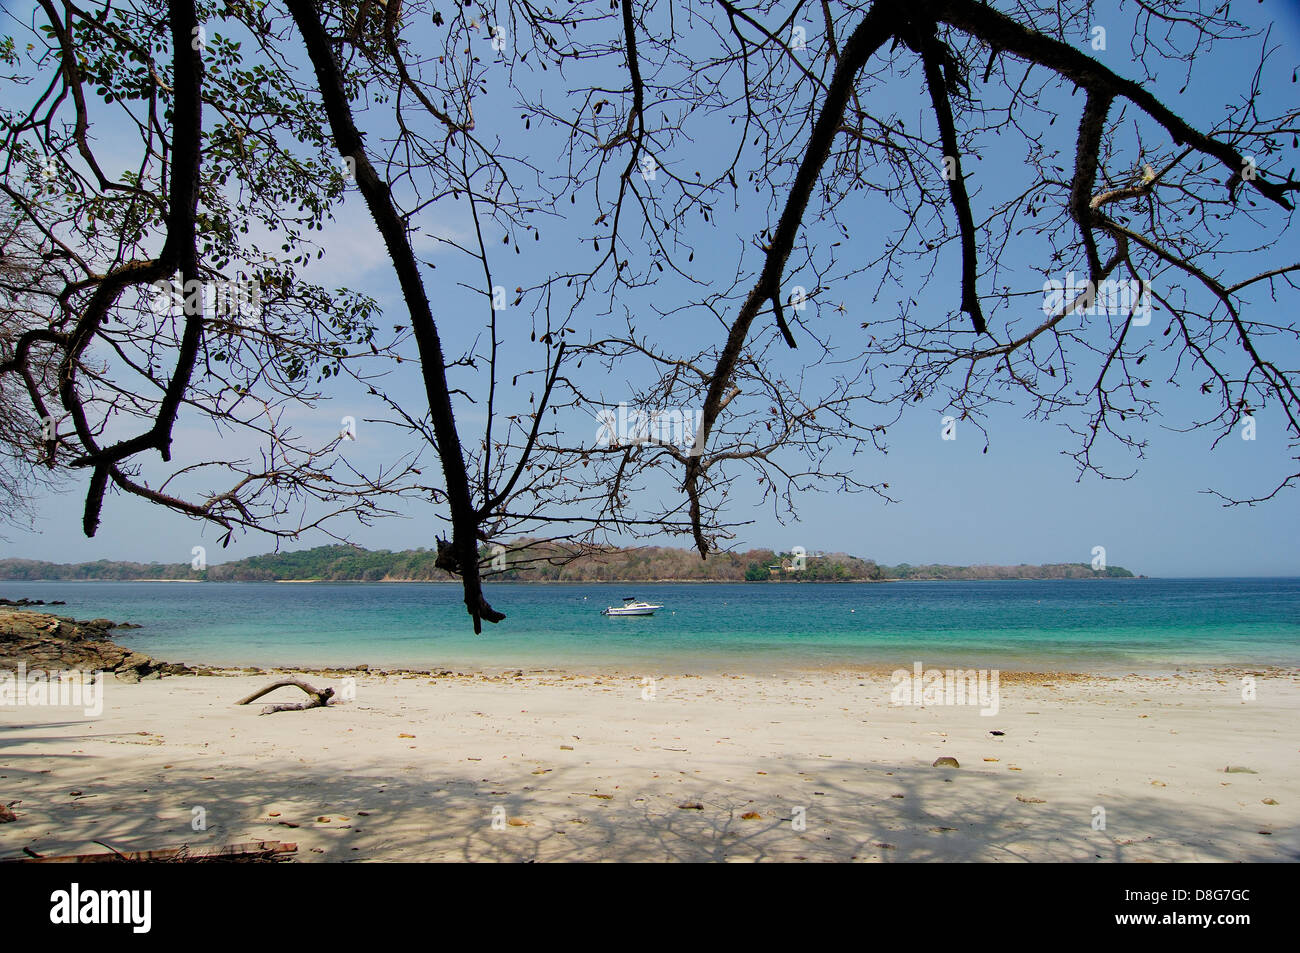 Branches of leafless tree at the beach in Contadora island Stock Photo